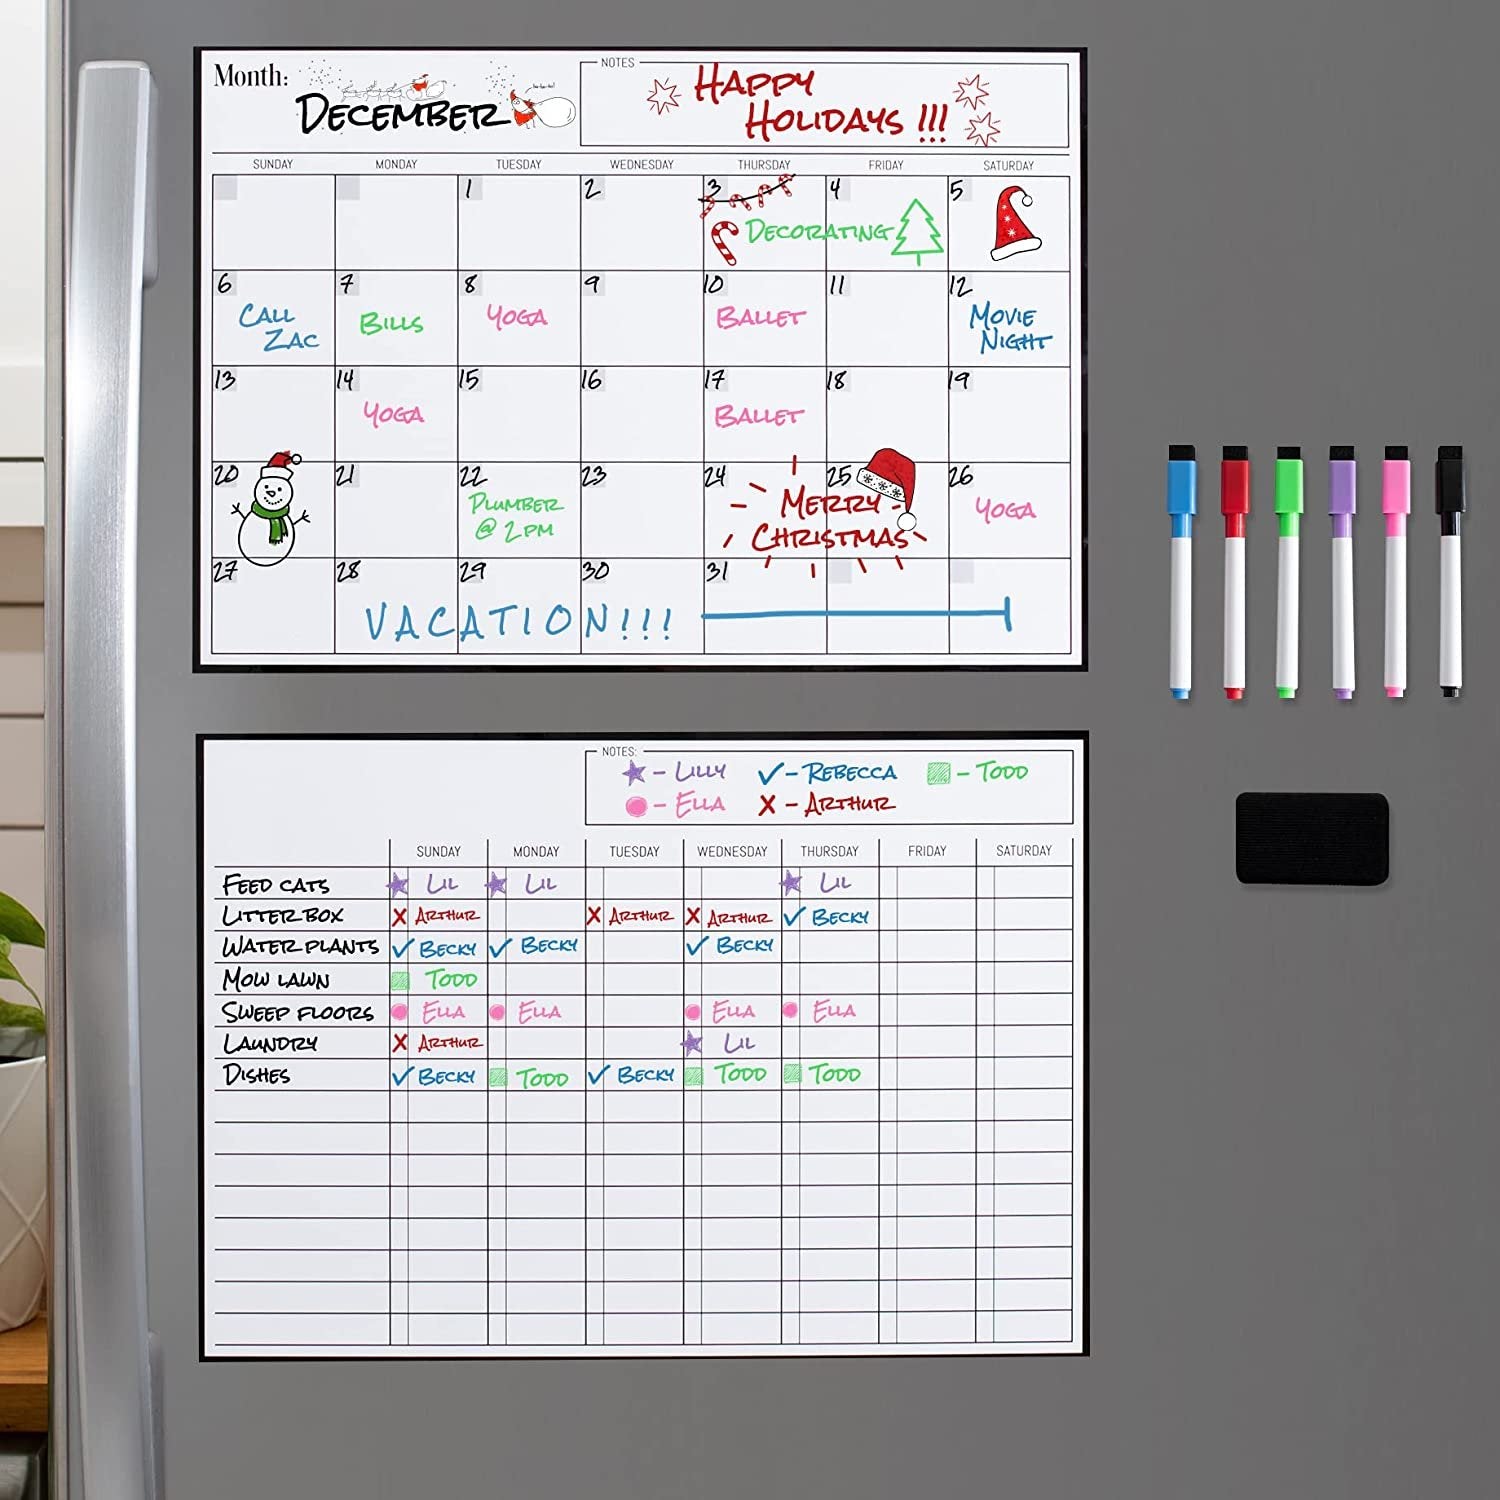 Magnetic Dry Erase Calendar and Chores Chart Bundle for Fridge: 2 Boards Included 17x12" - 6 Fine Tip Markers and Large Eraser with Magnets | Magnetic Chore Chart - Chore Board for Kids and Adults